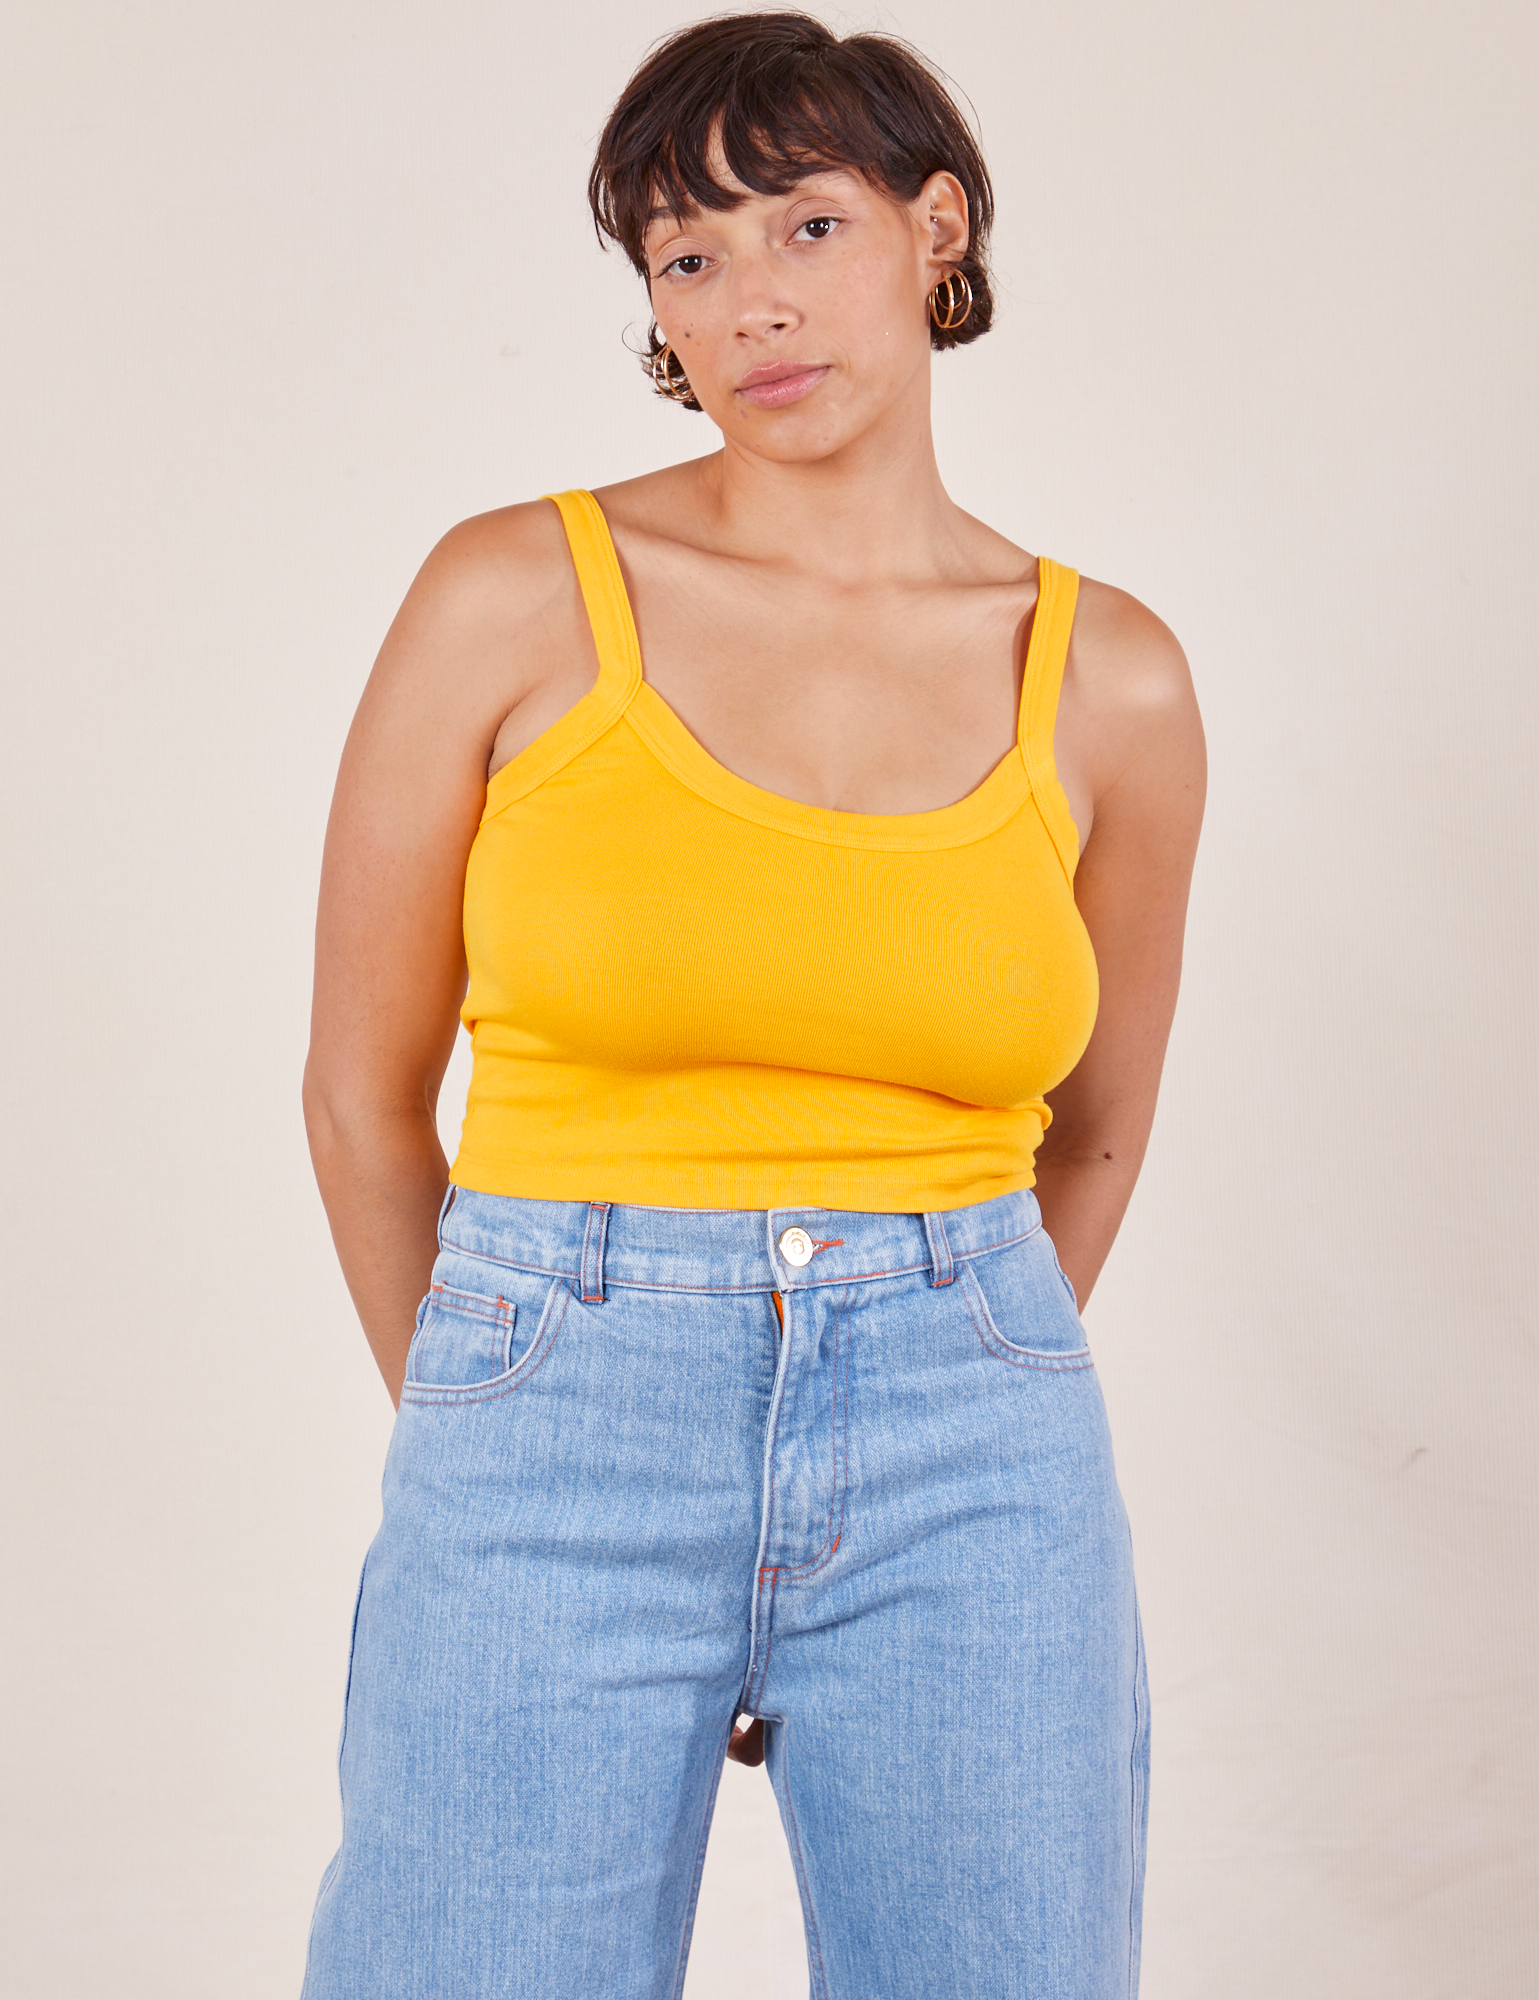 Tiara is 5&#39;4&quot; and wearing XS Cropped Cami in Sunshine Yellow paired with light wash Sailor Jeans